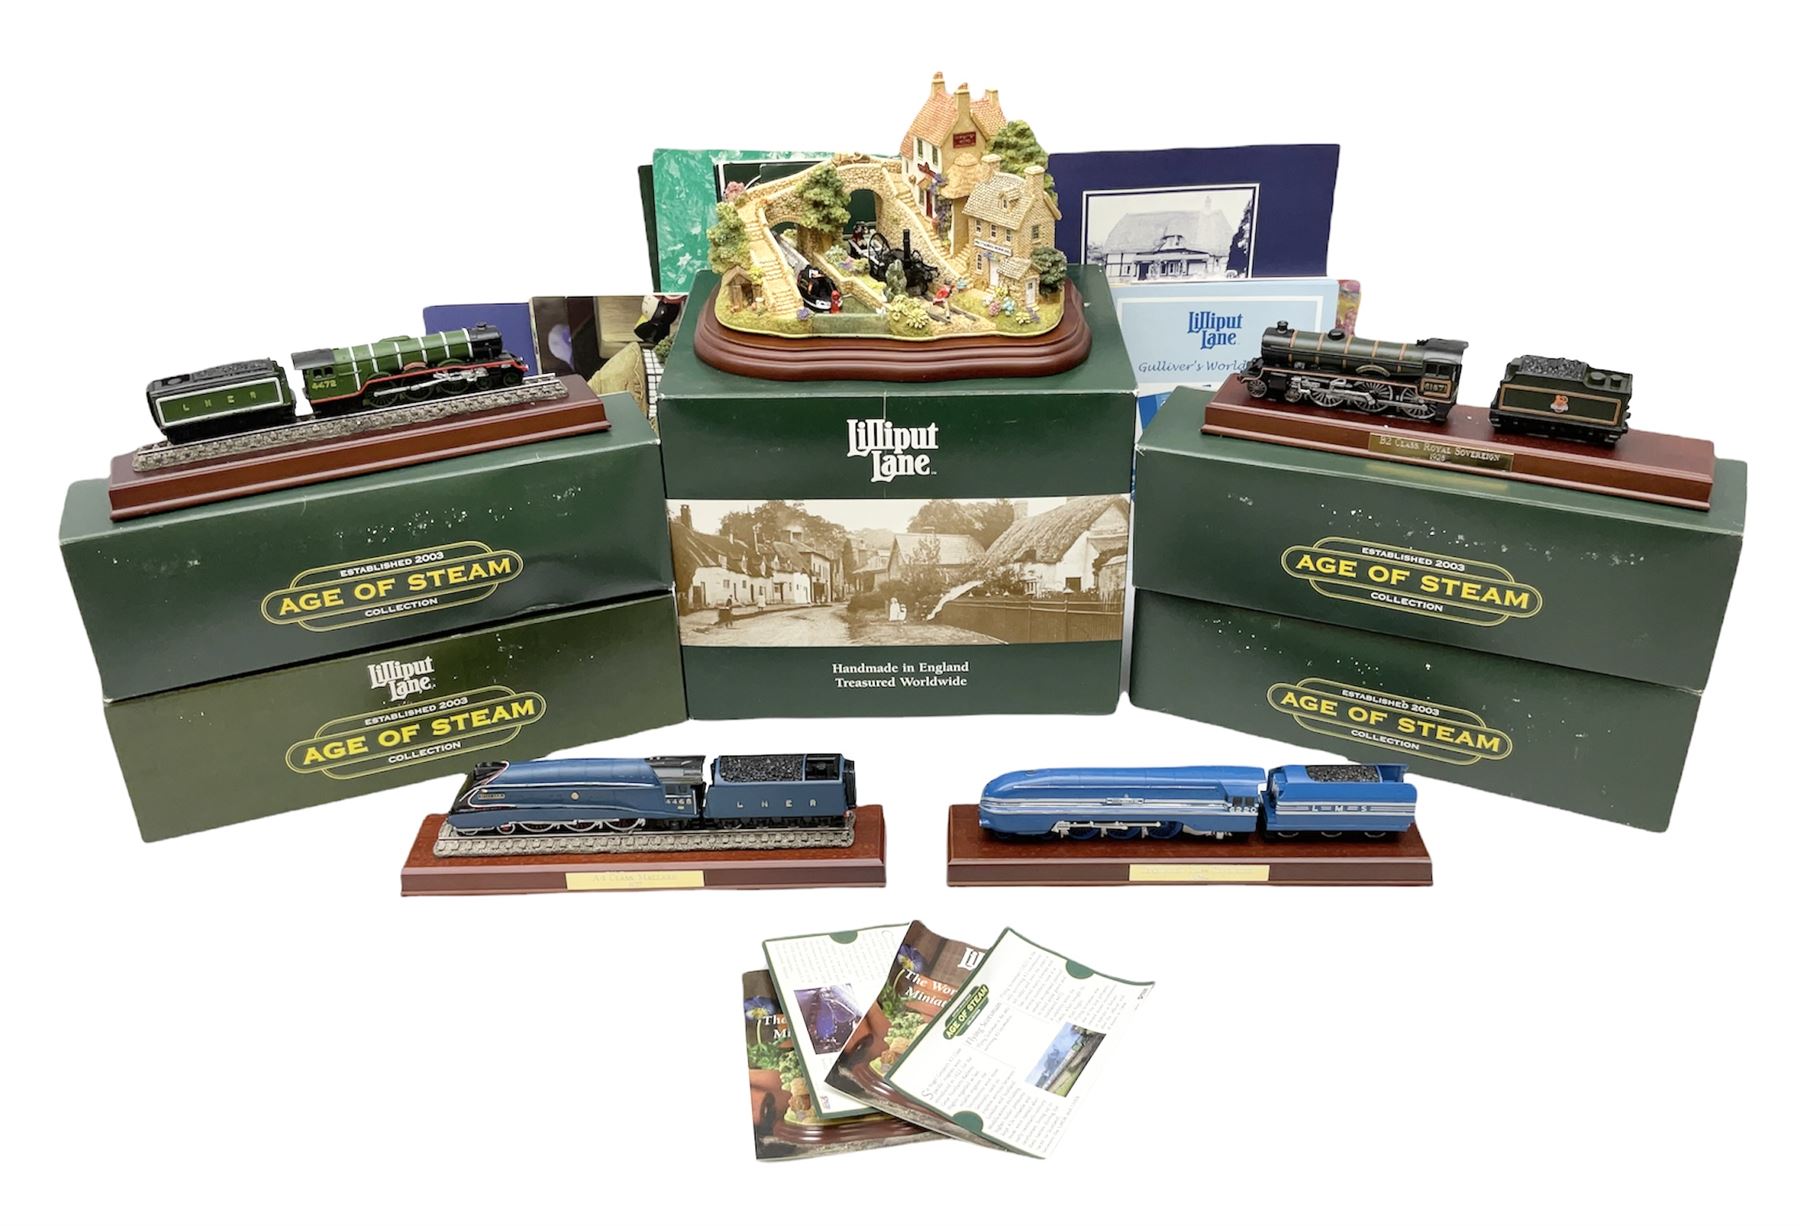 Lilliput Lane models to include 'Age of Steam' locomotives